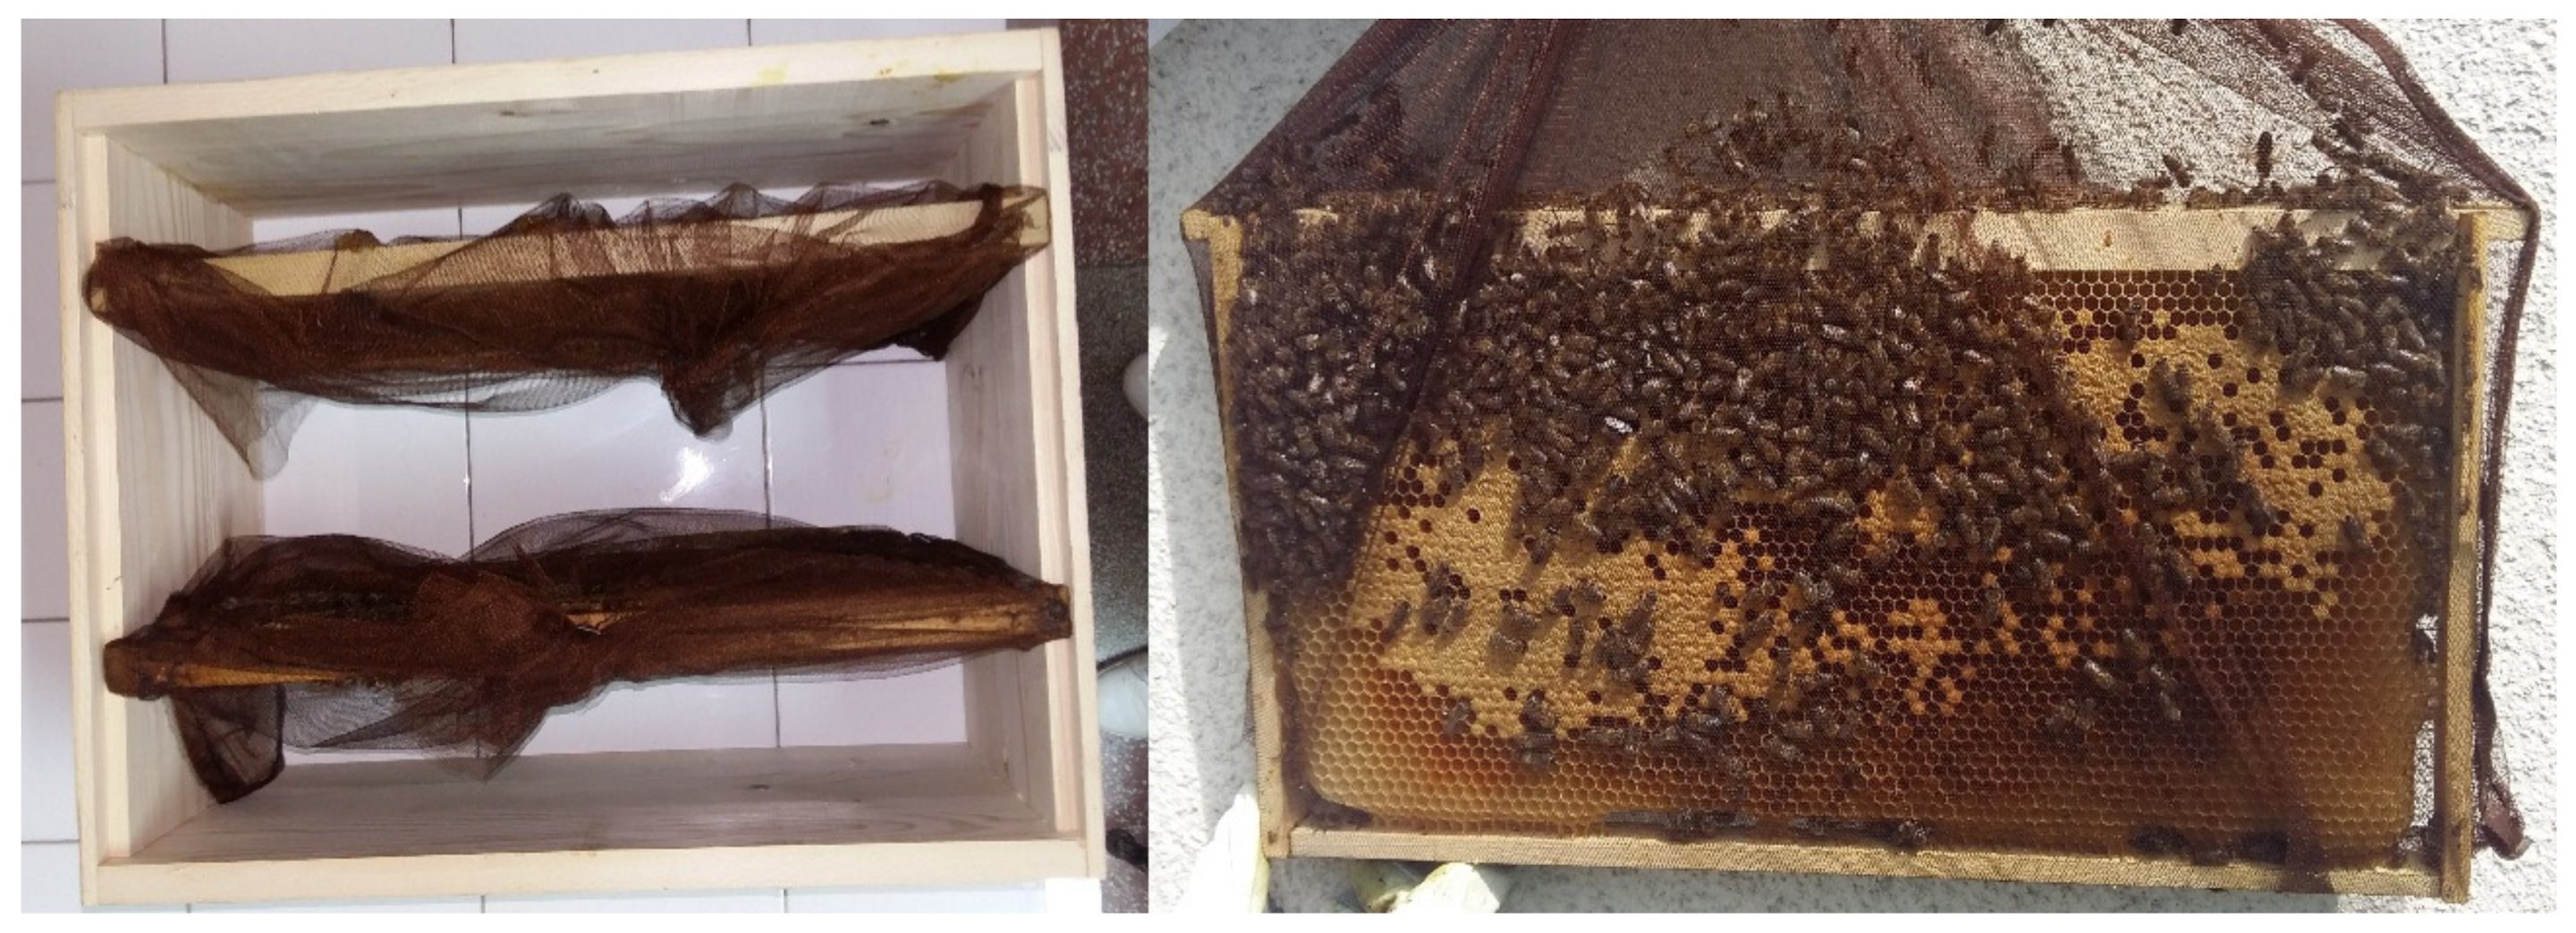 The Surprising Architecture in Bees' Honeycombs